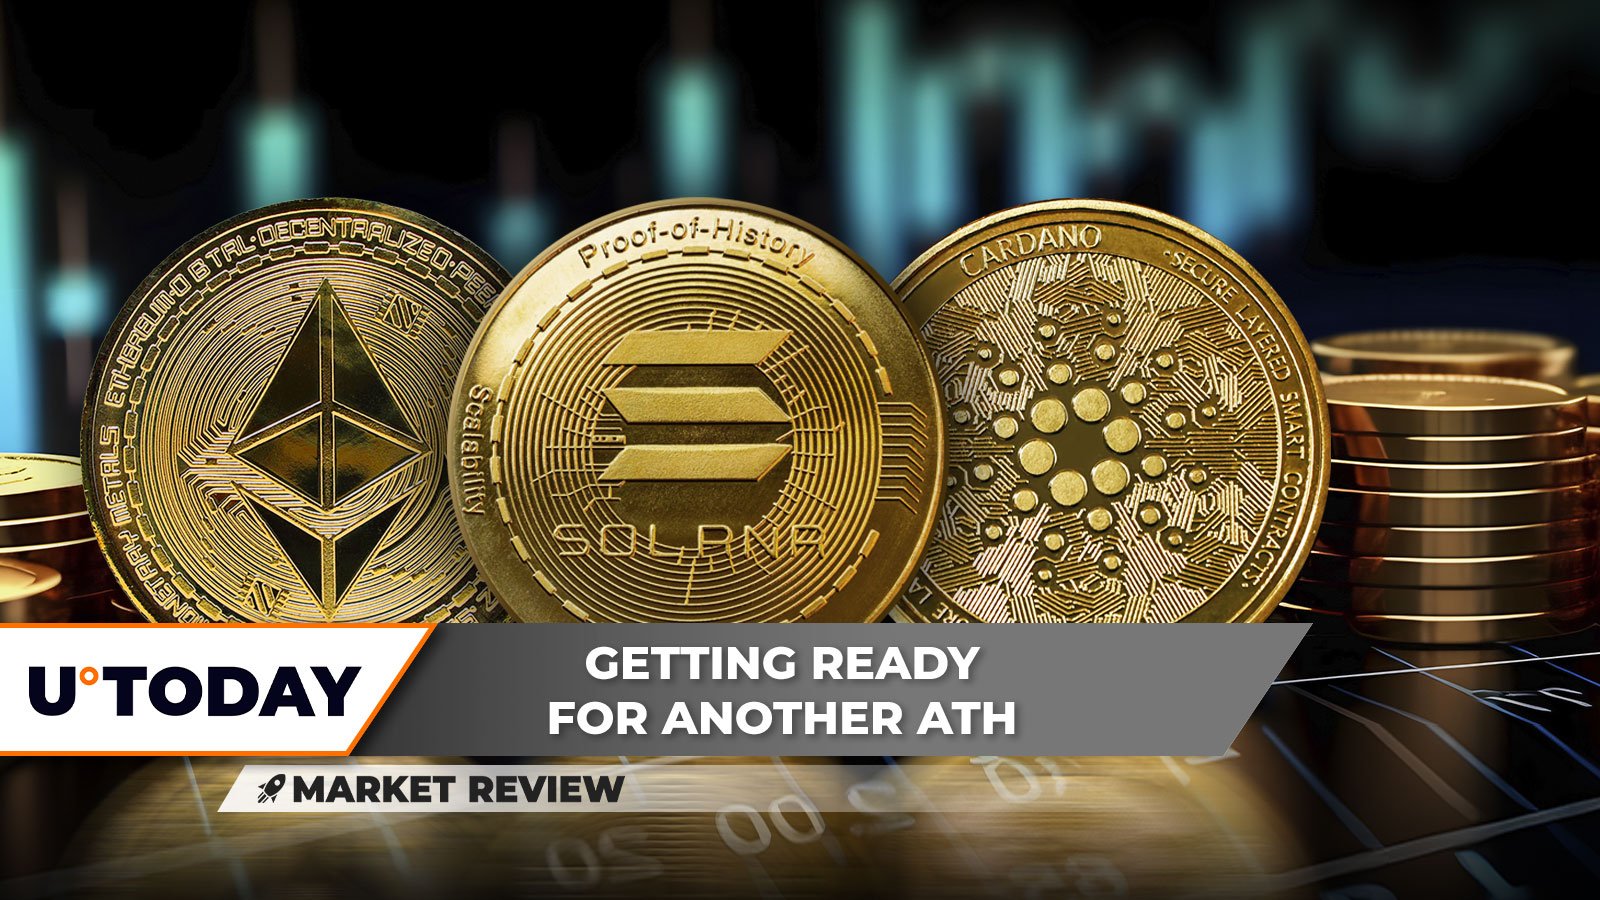 Is Ethereum (ETH) Next to Reach ATH? Solana (SOL) Finally Breaks Through, Will Cardano (ADA) Recover? 